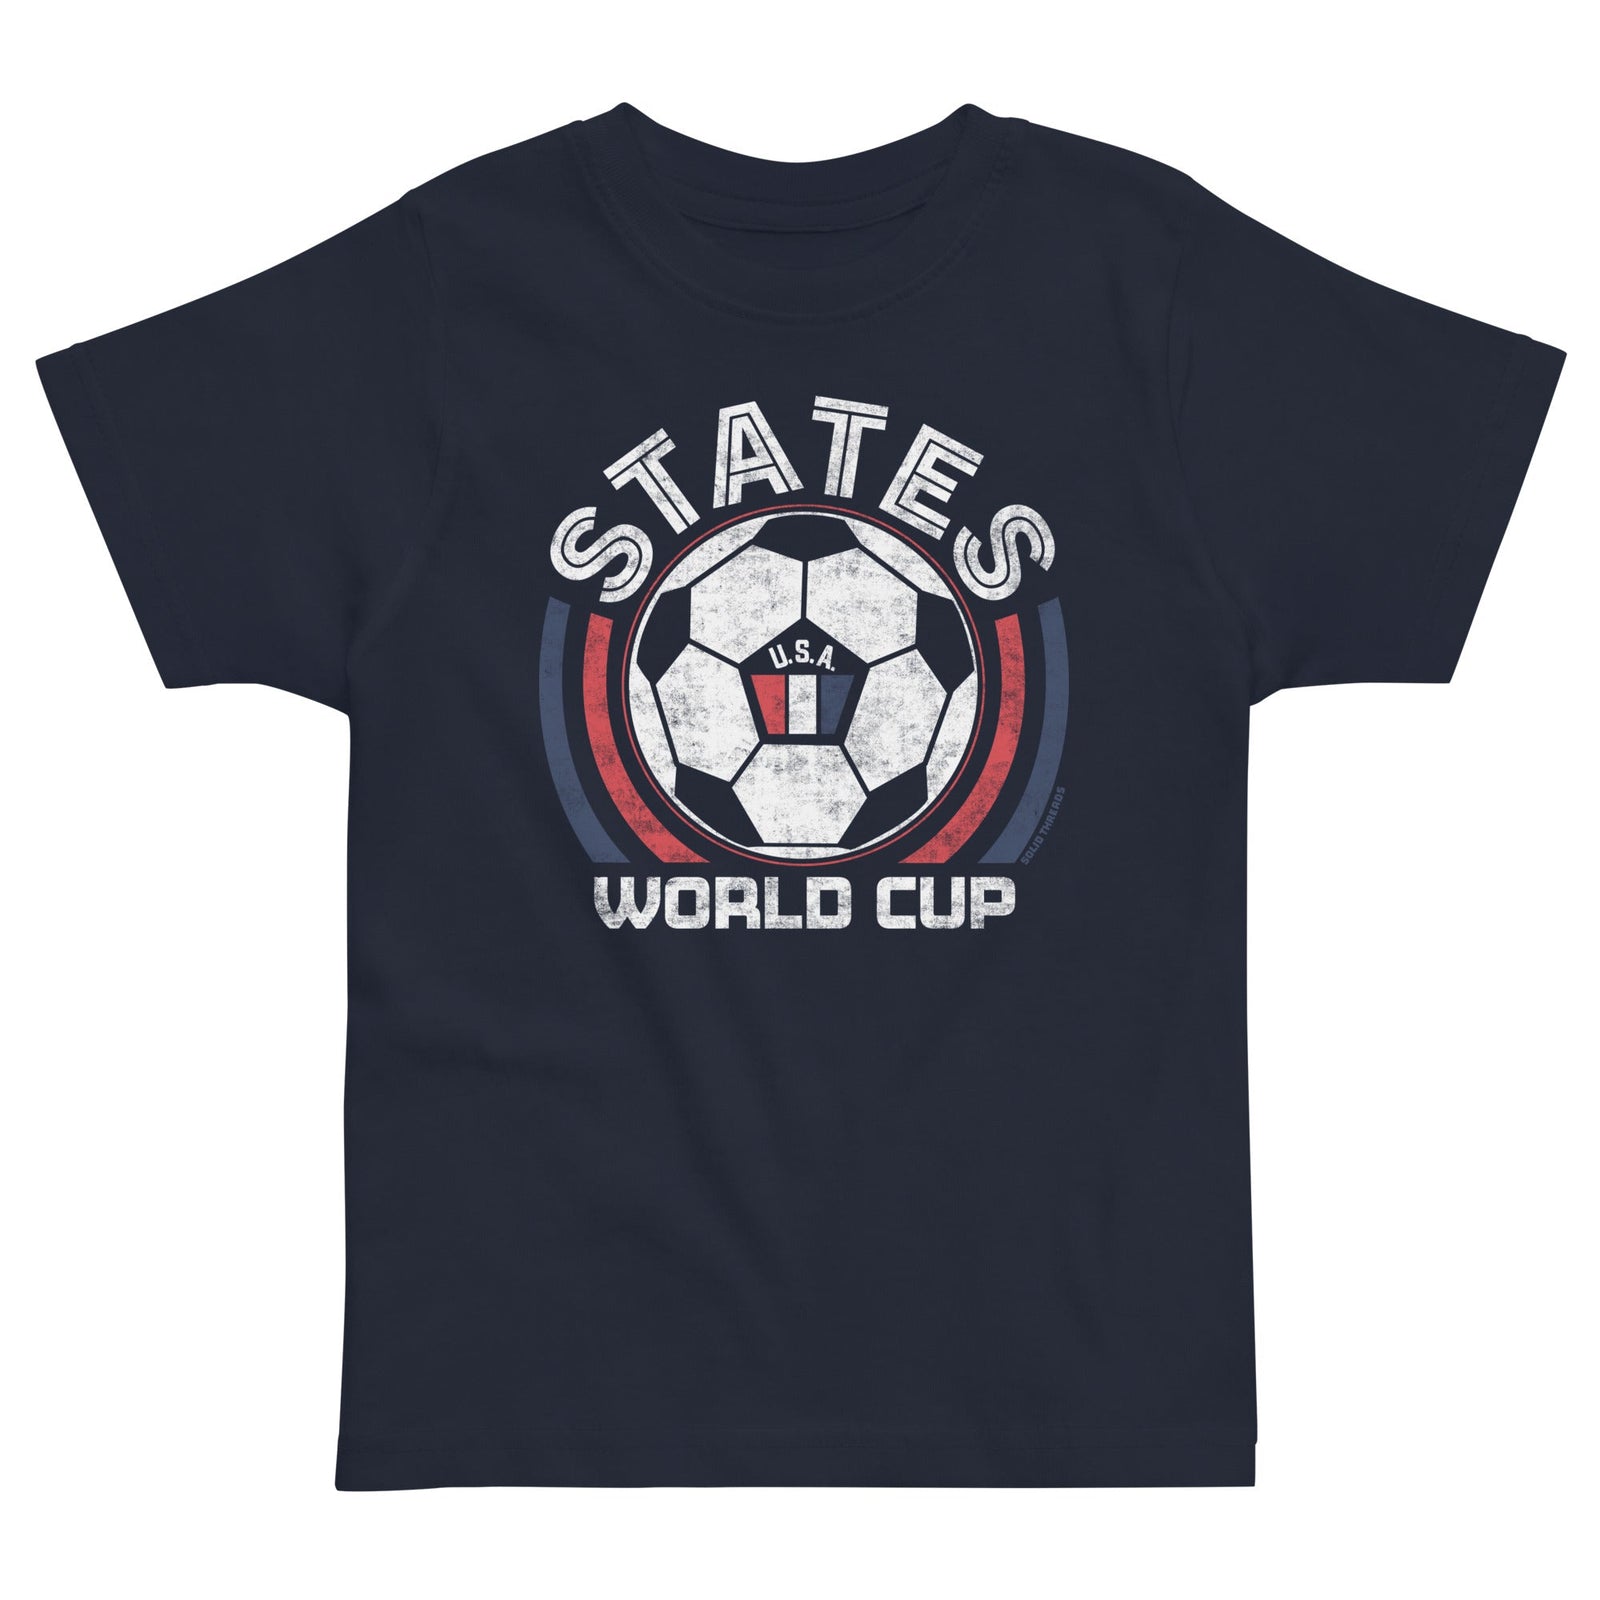 Toddler's US Soccer Team Cool Extra Soft T-Shirt | Retro FIFA World Cup Tee | Solid Threads